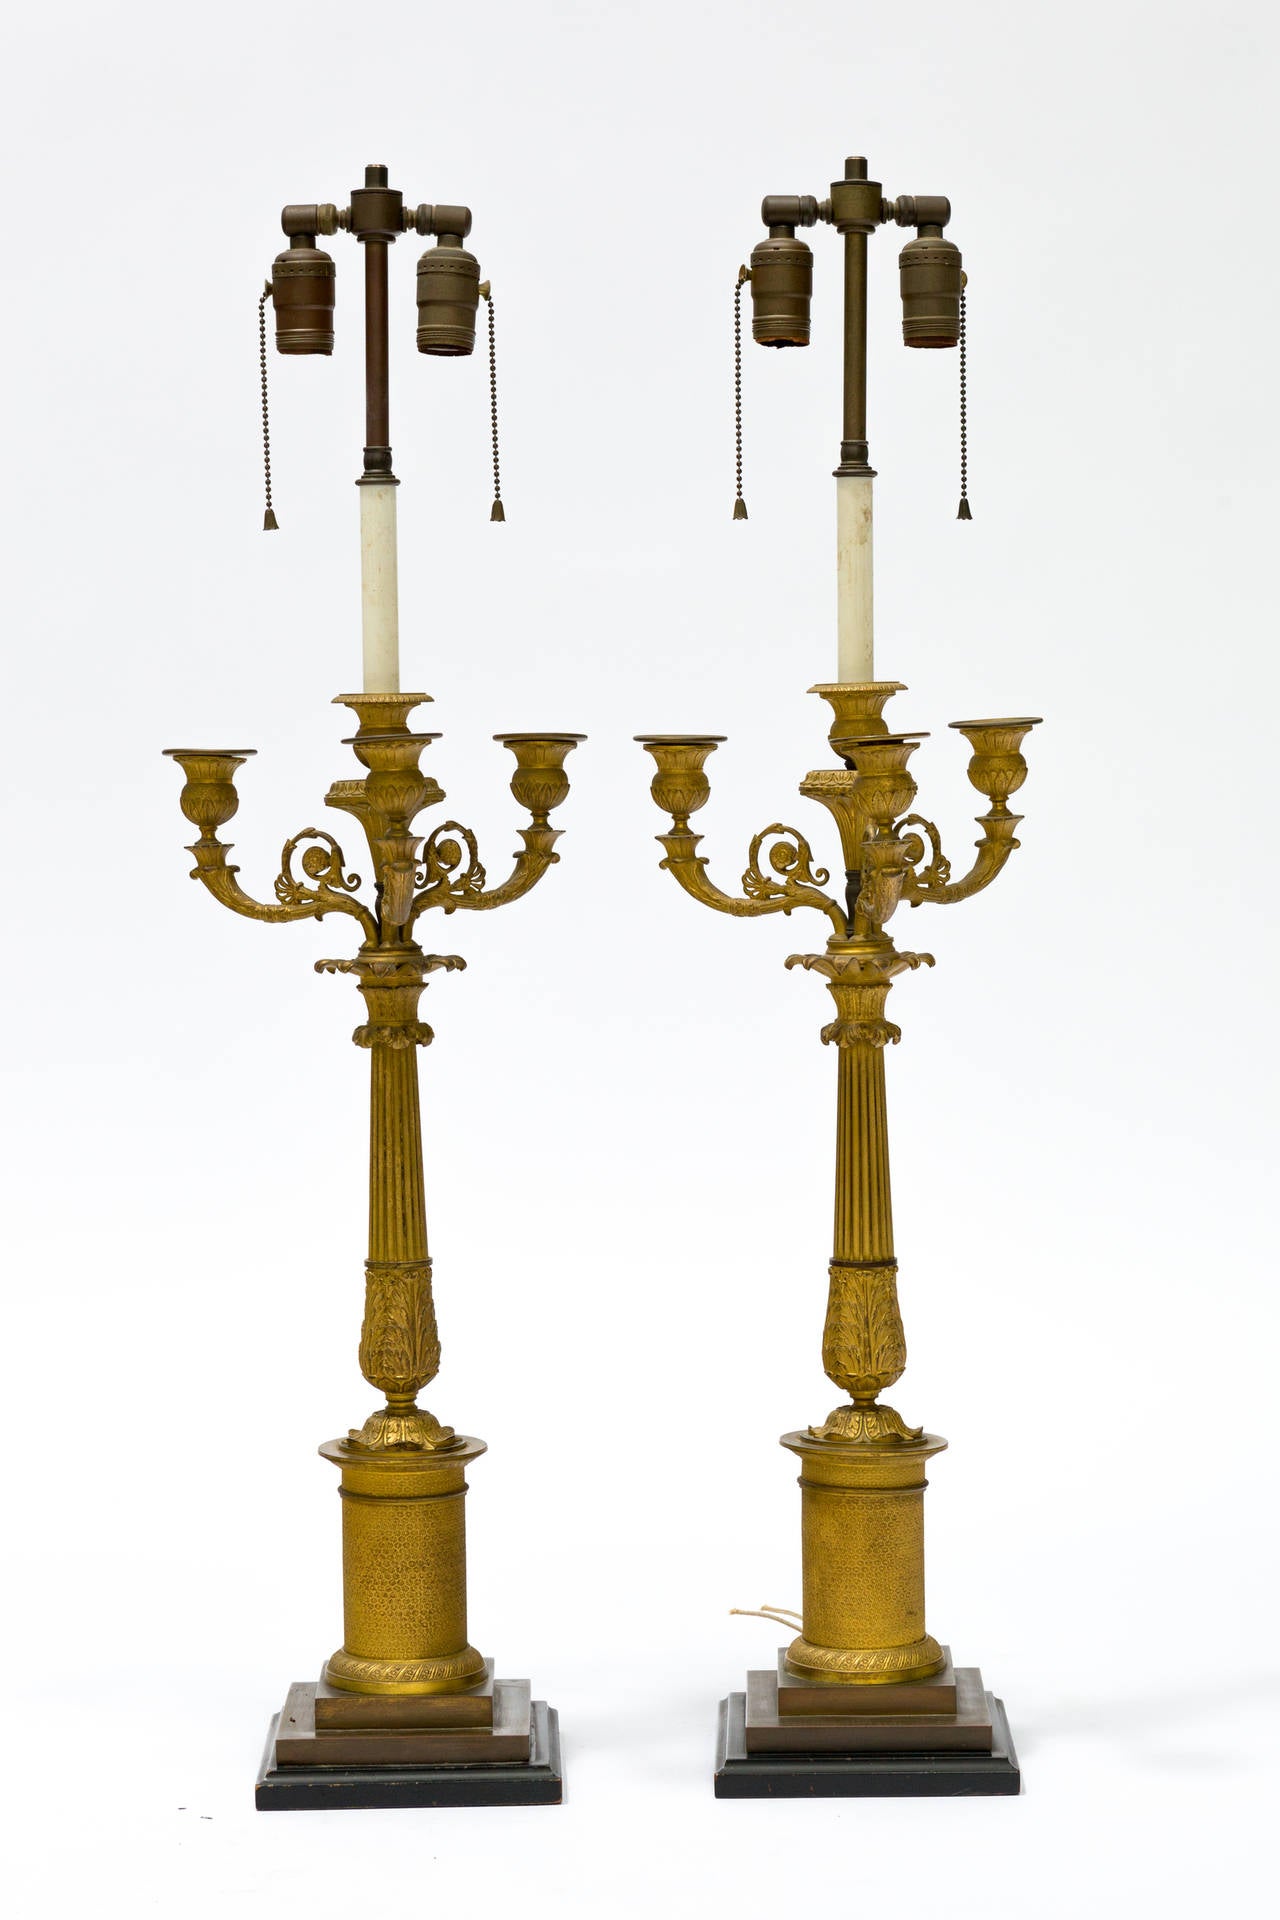 Pair of French Empire candelabrum converted to lamps, circa 1870. Beautiful detailed casting on a bronze base. Lamps have been professionally rewired.